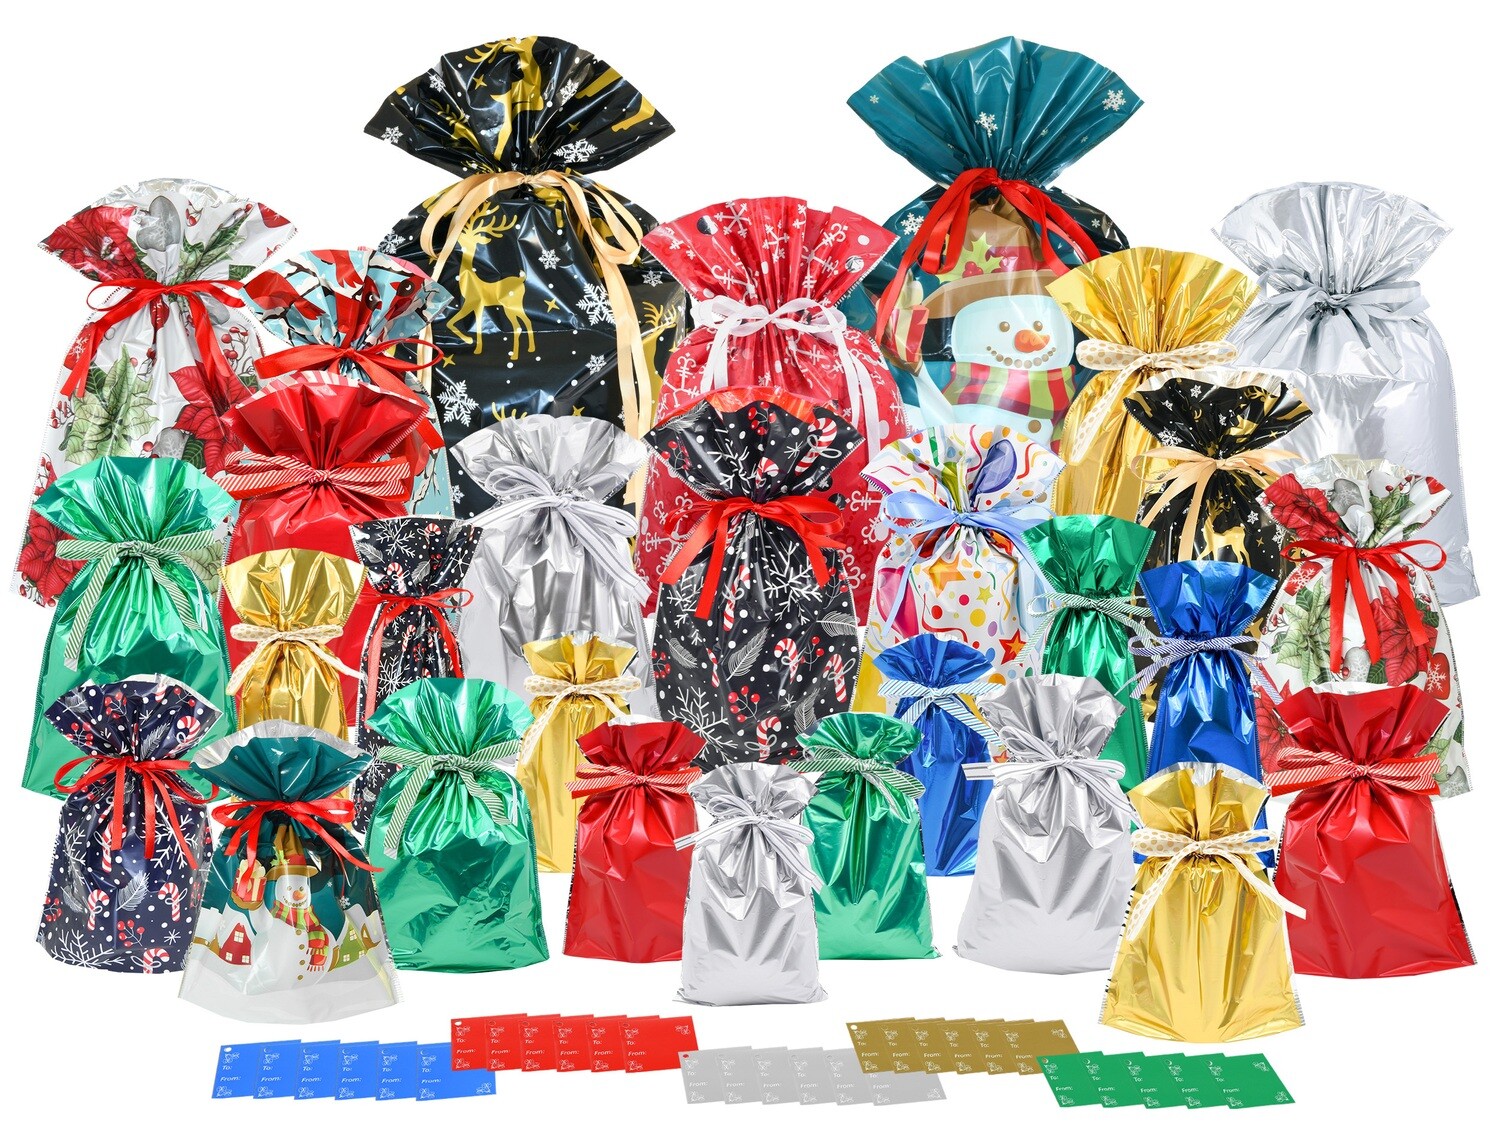 58-Piece Gift Bag Set (29 Gift Bags and 29 Gift Tags)